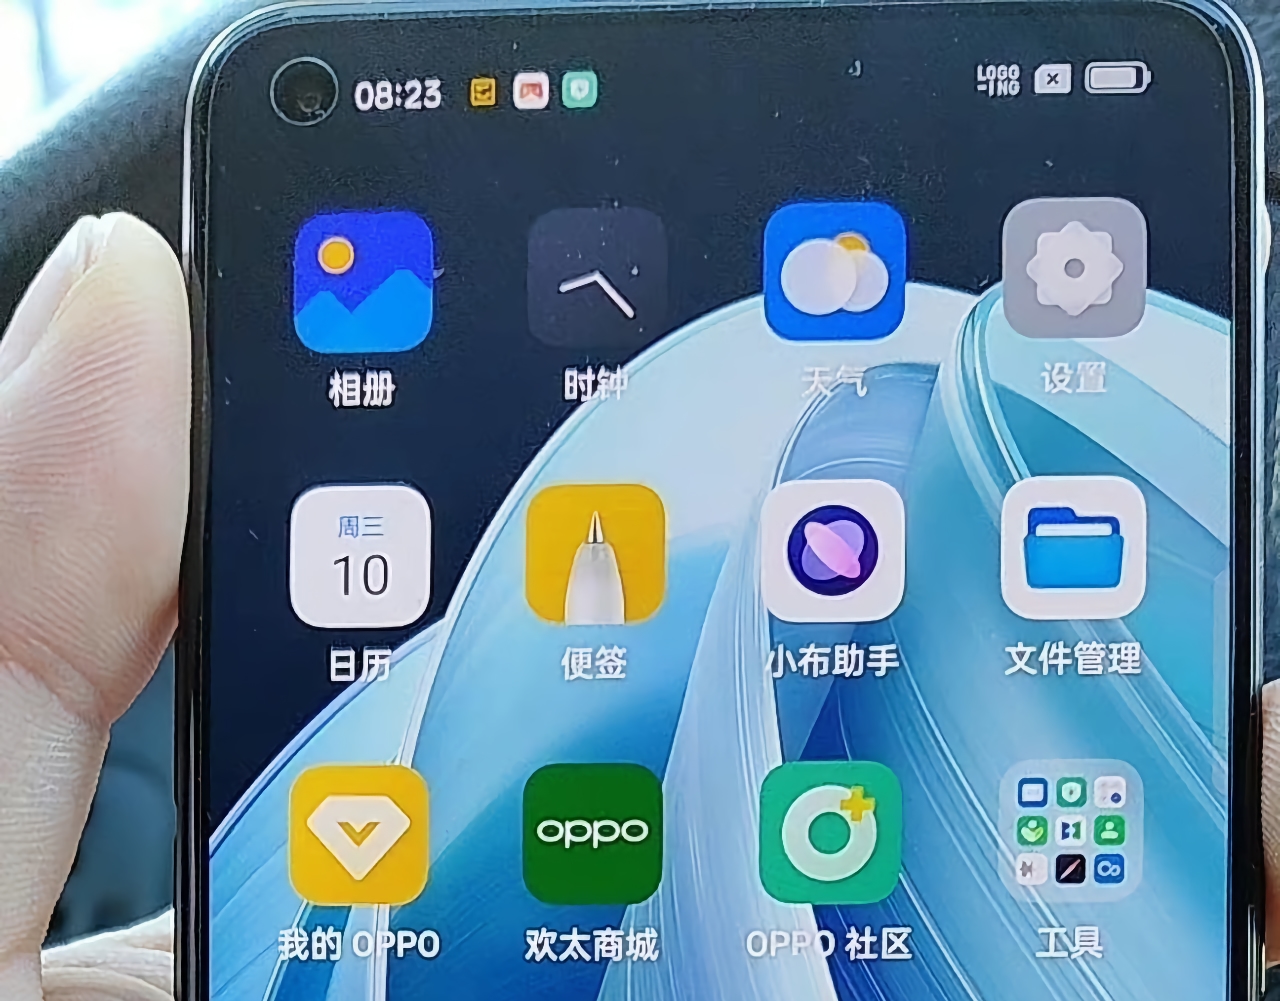 OPPO Reno 7 Pro with a "hole" screen with no curves and thin bezels spotted in a photo